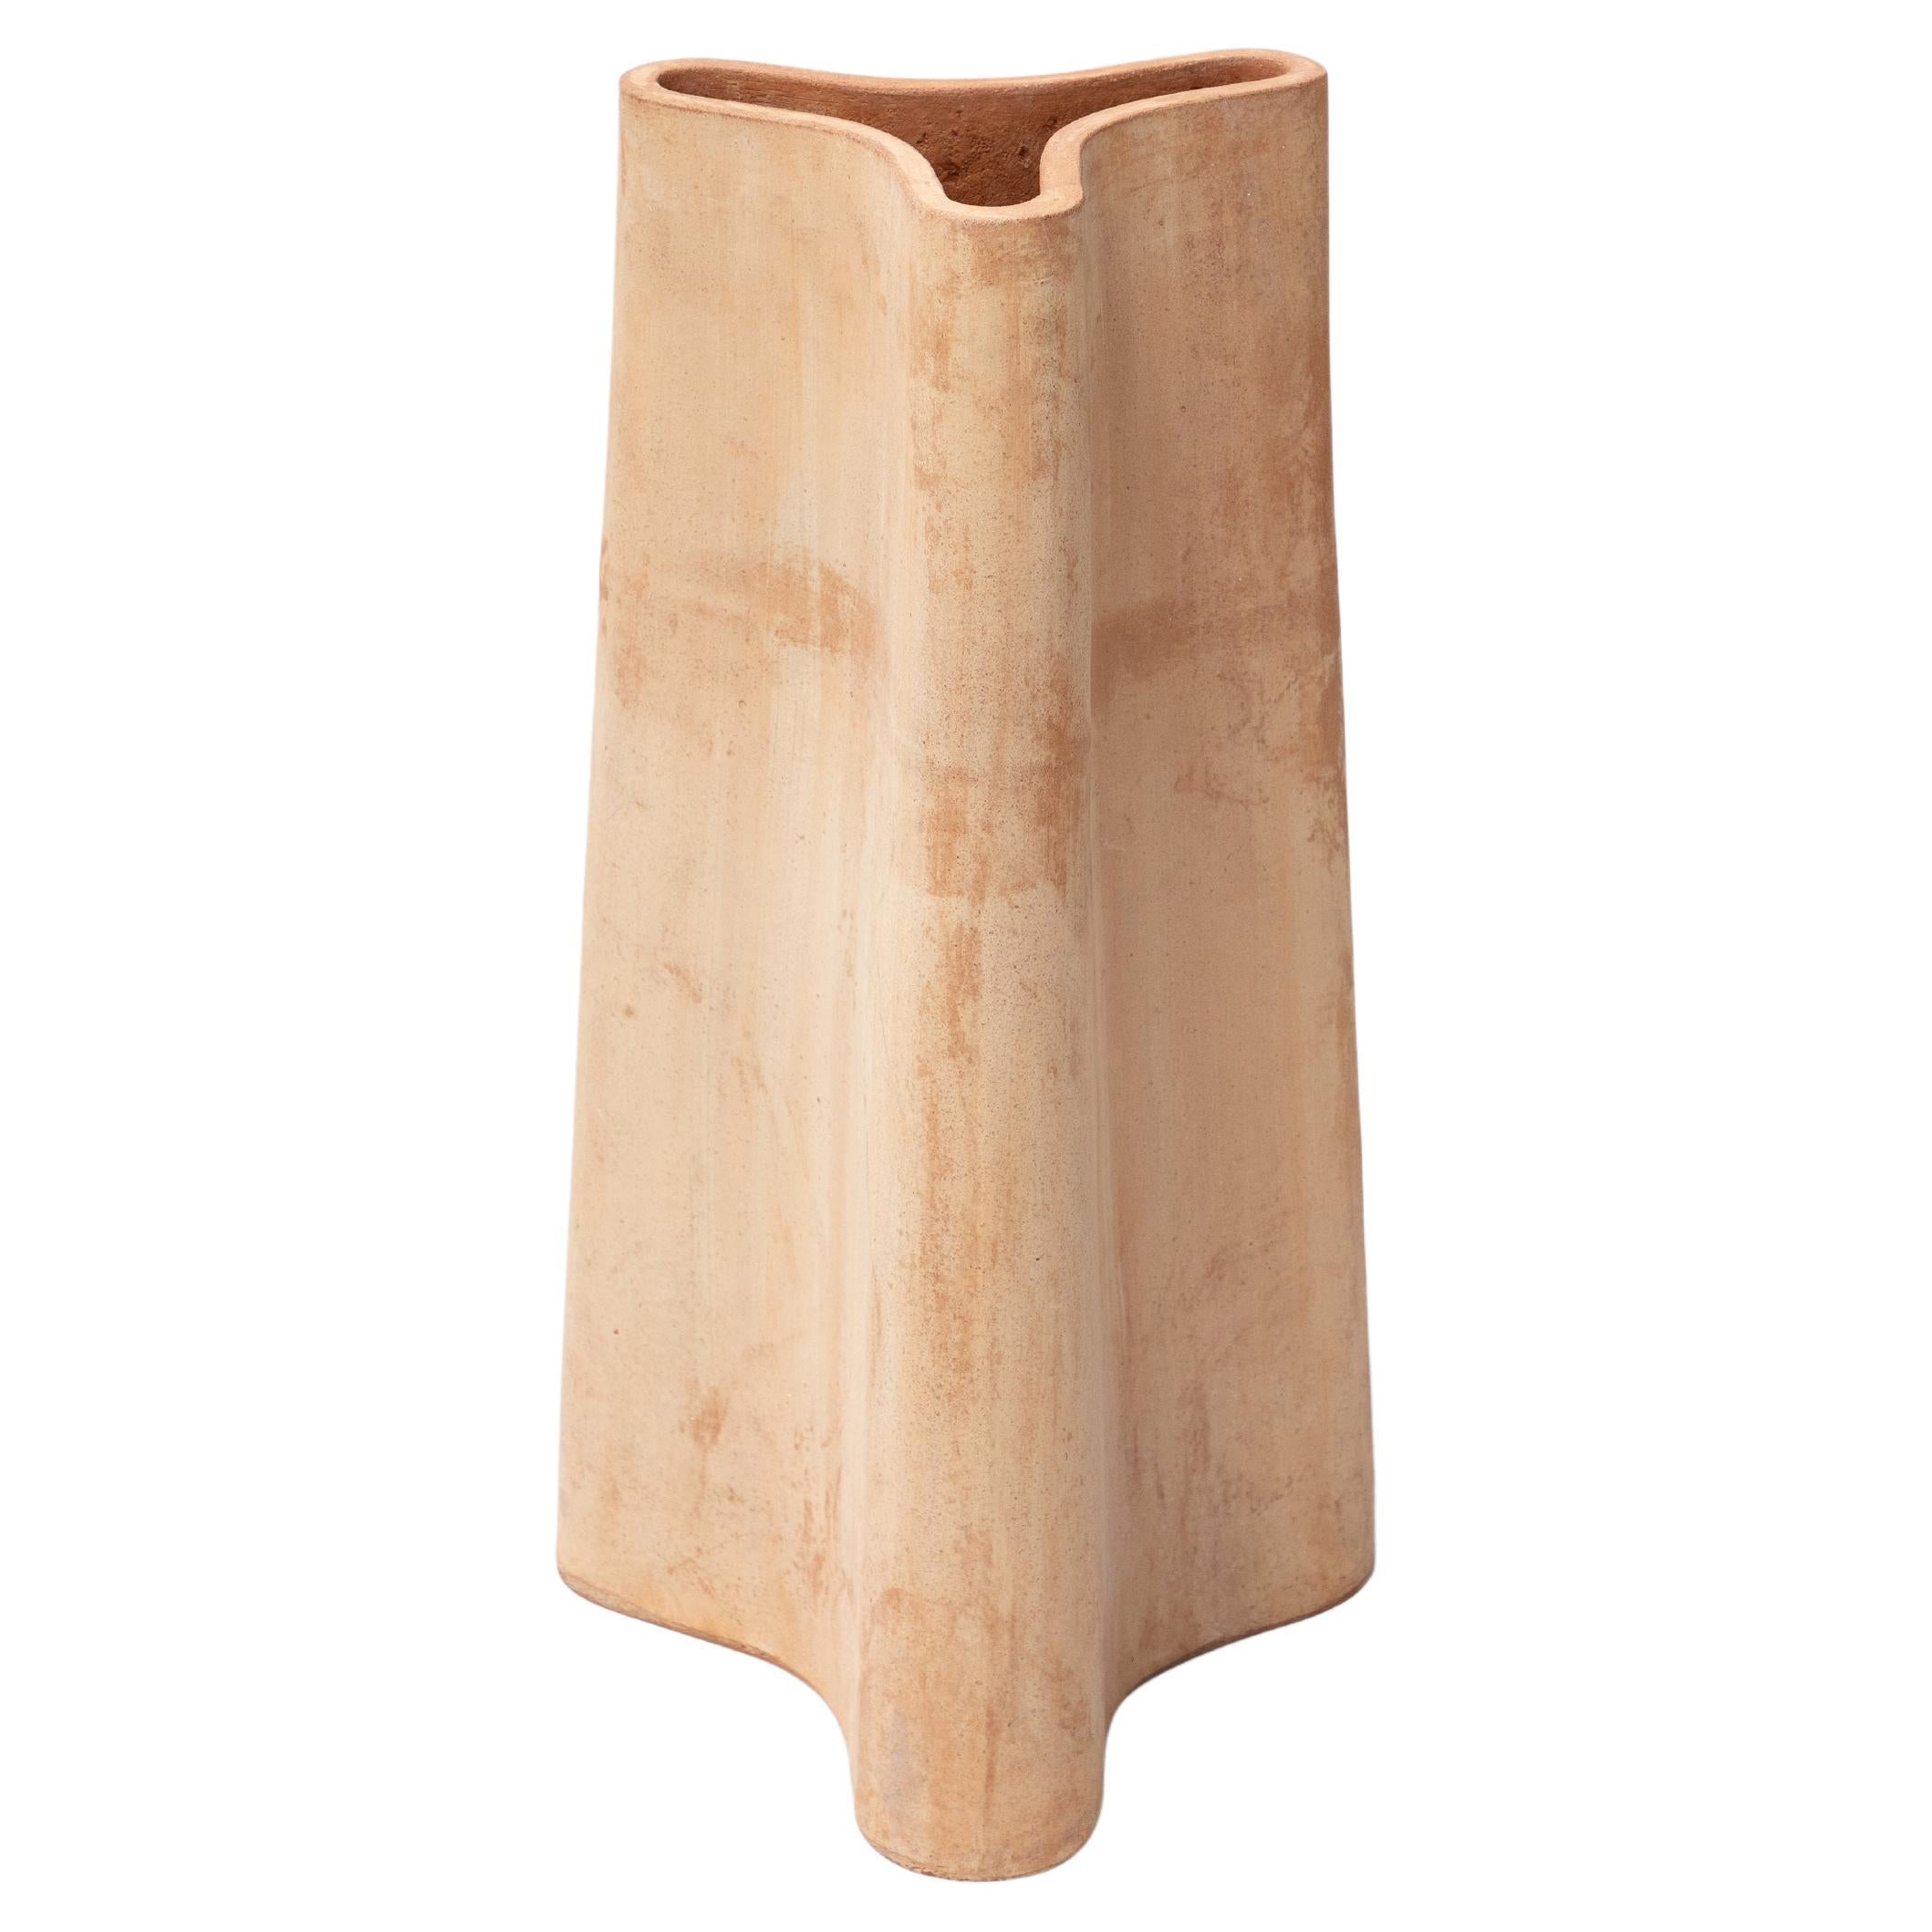 New Volumes Terracotta Skáfos Umbrella Stand by Chris Connell For Sale